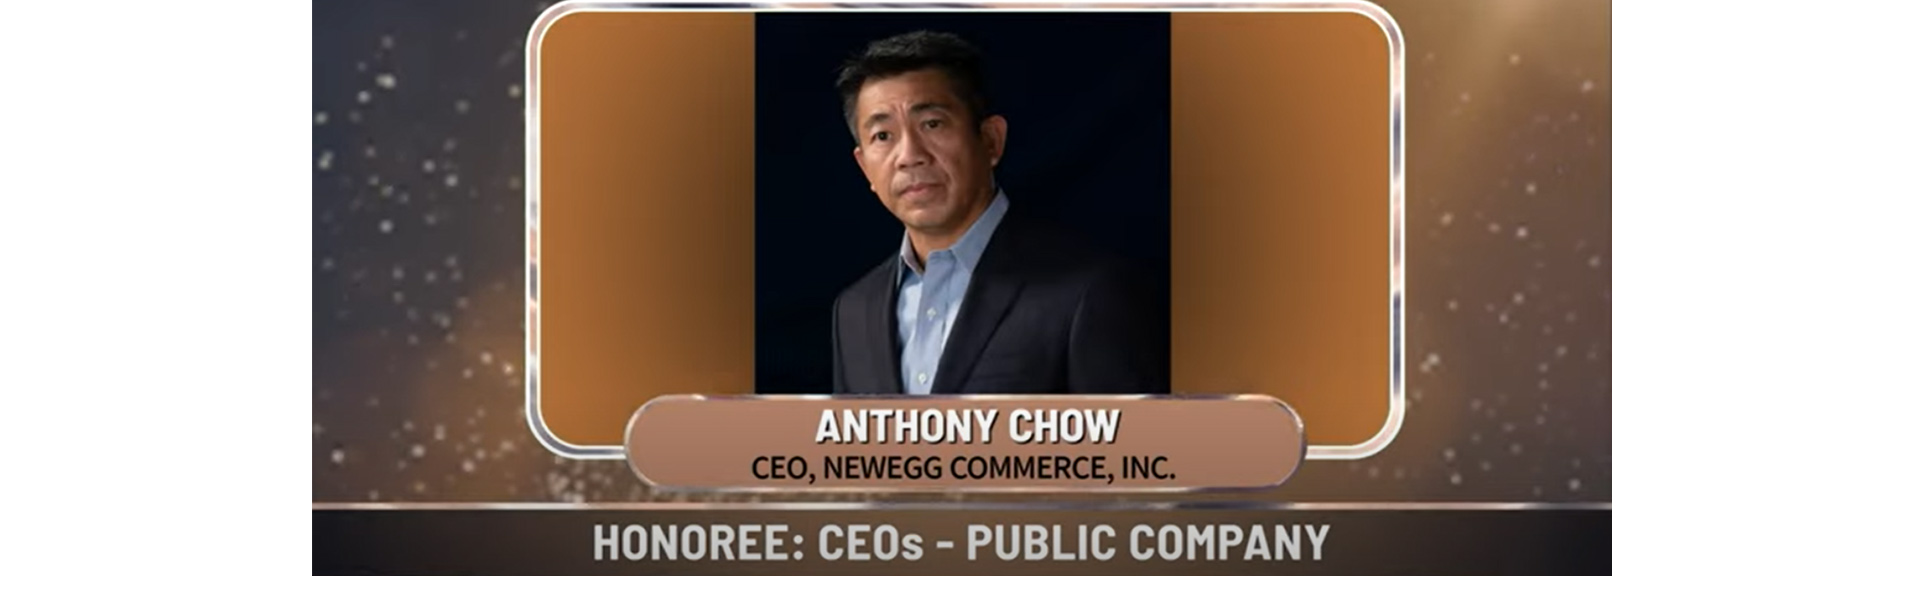 Newegg CEO Anthony Chow Receives the Los Angeles Times CEO Leadership Award